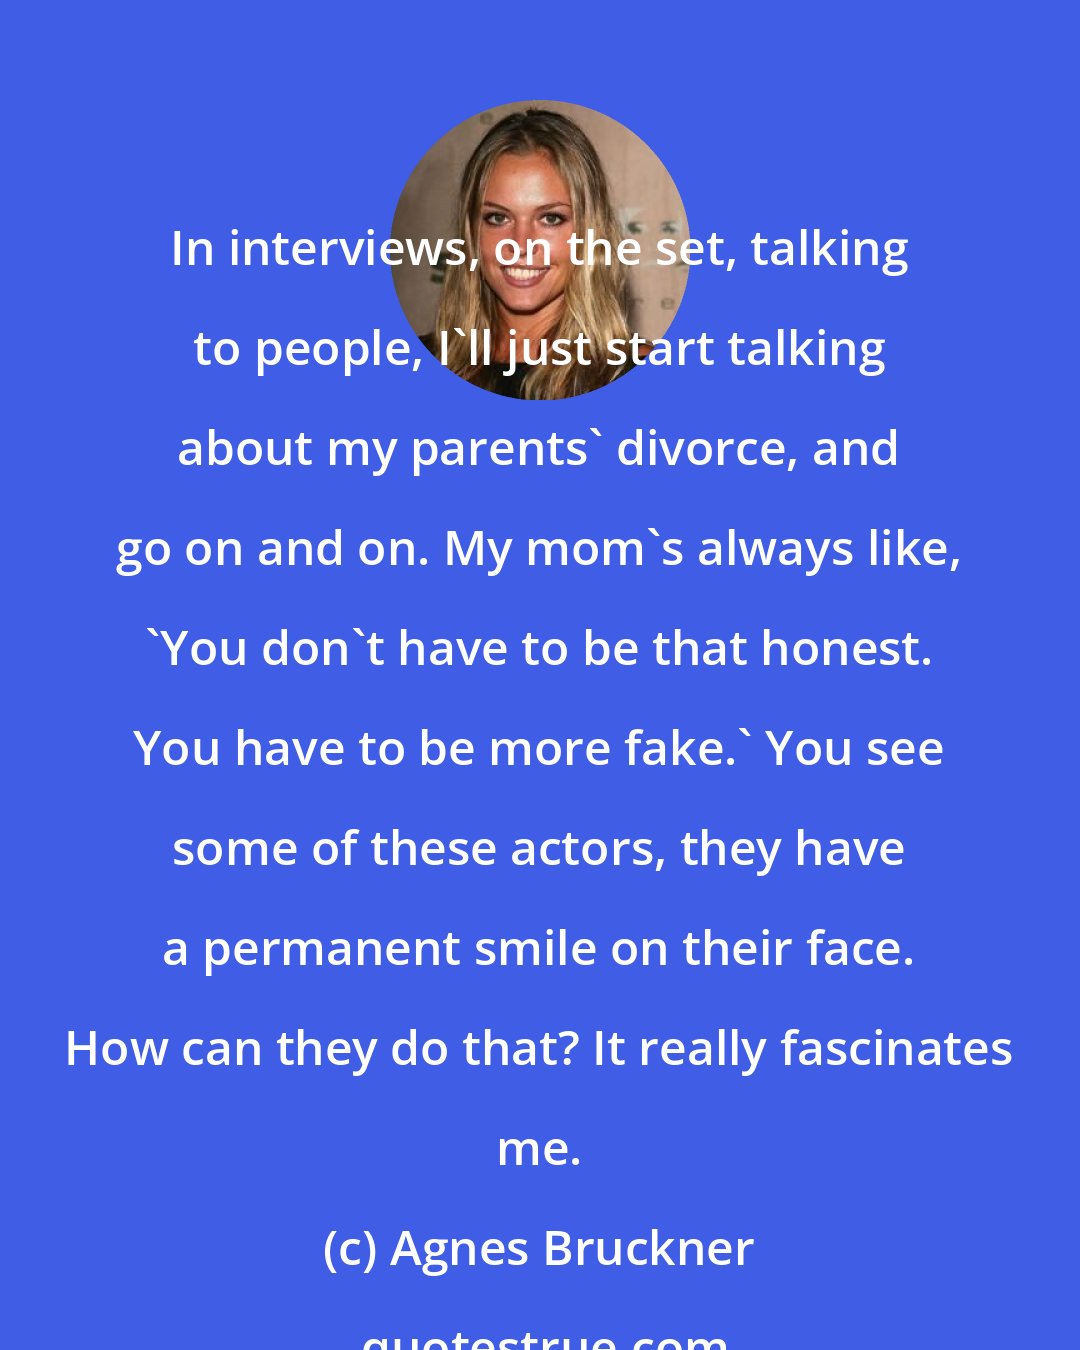 Agnes Bruckner: In interviews, on the set, talking to people, I'll just start talking about my parents' divorce, and go on and on. My mom's always like, 'You don't have to be that honest. You have to be more fake.' You see some of these actors, they have a permanent smile on their face. How can they do that? It really fascinates me.